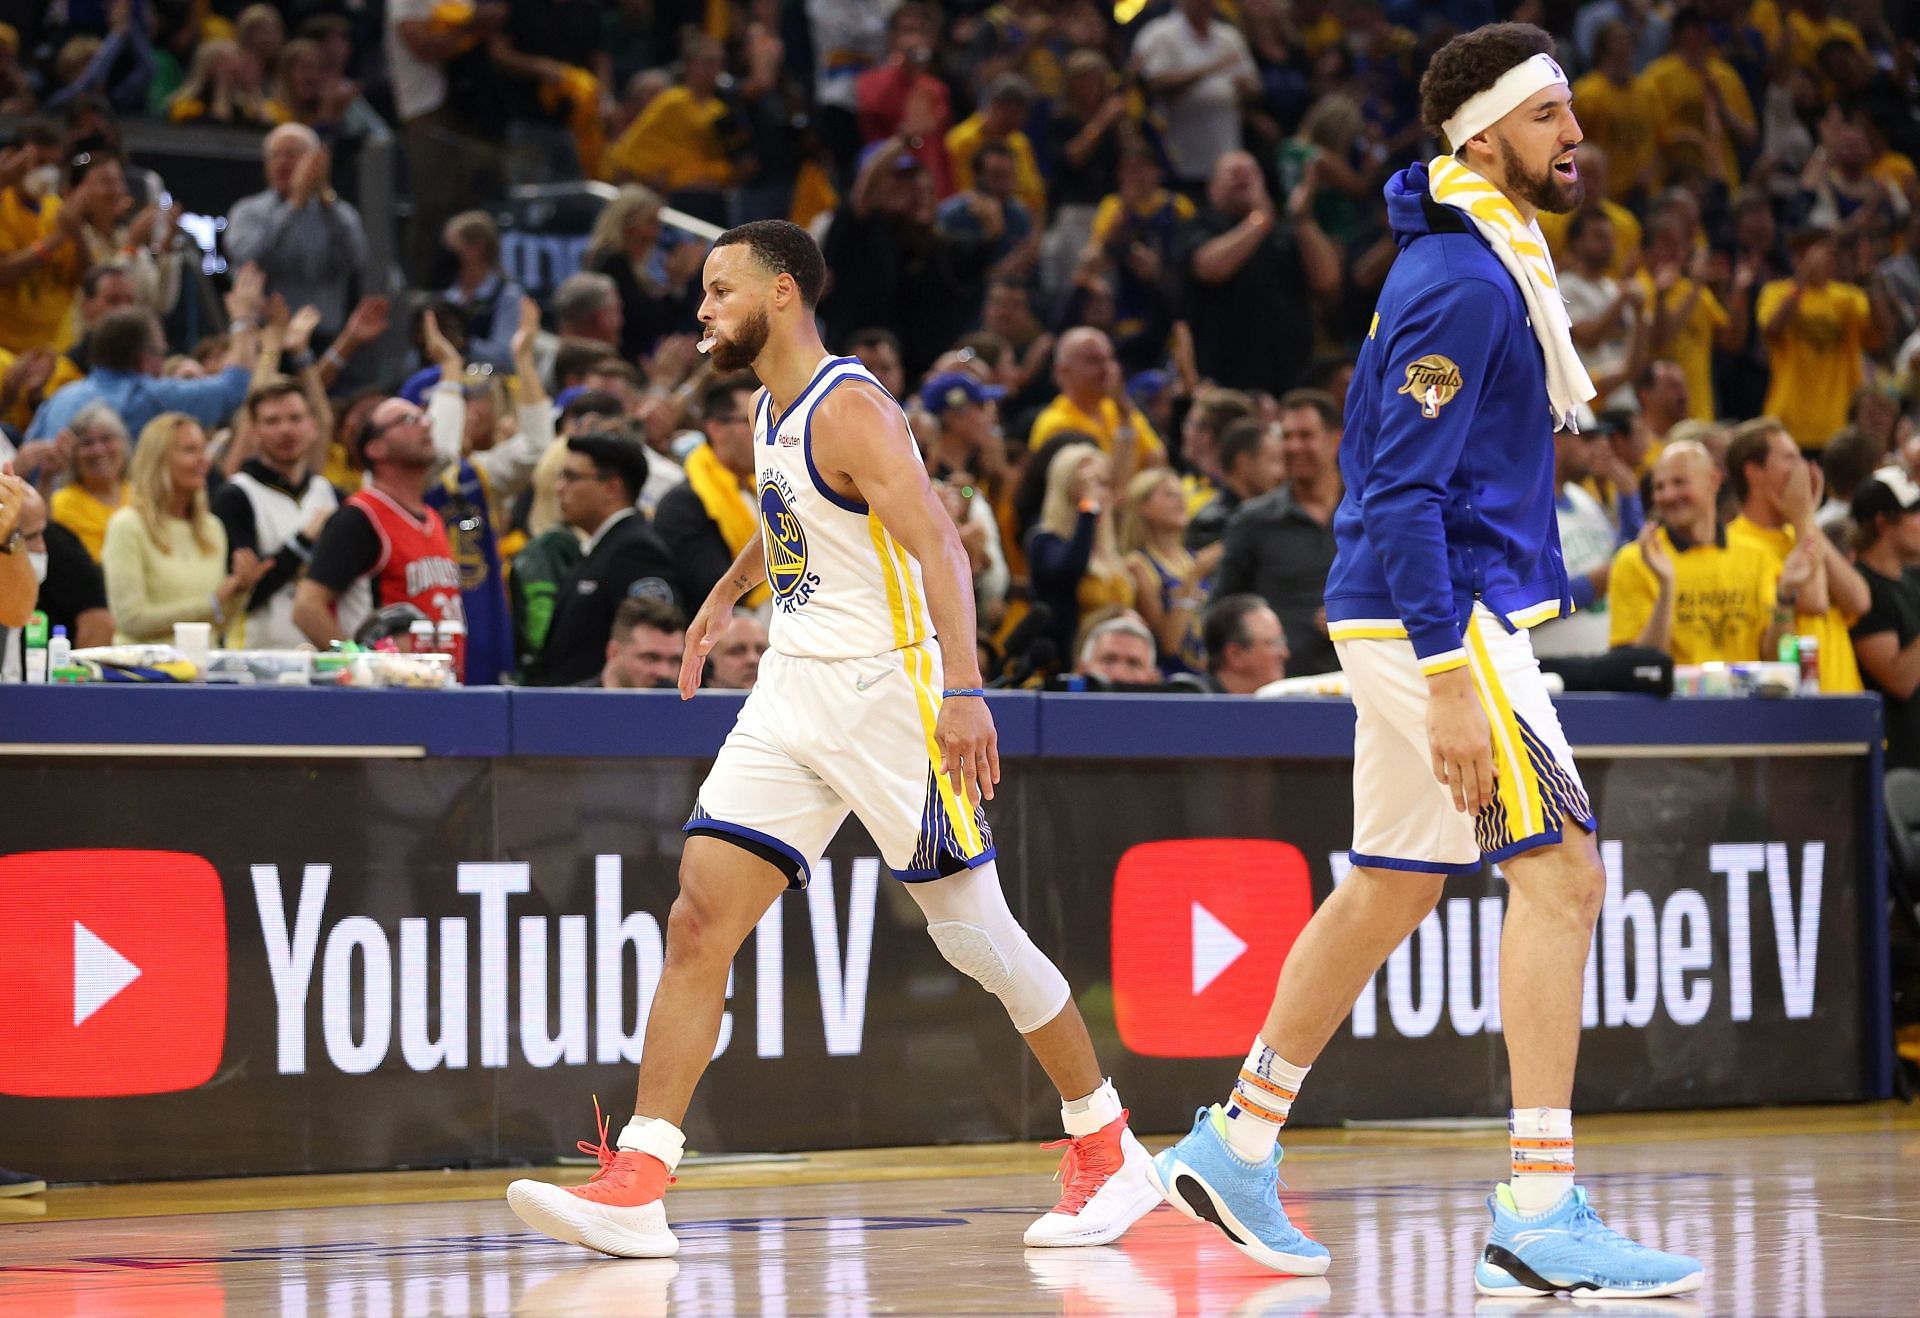 Steph Curry believes that his 5x All-Star teammate can get going at any moment.